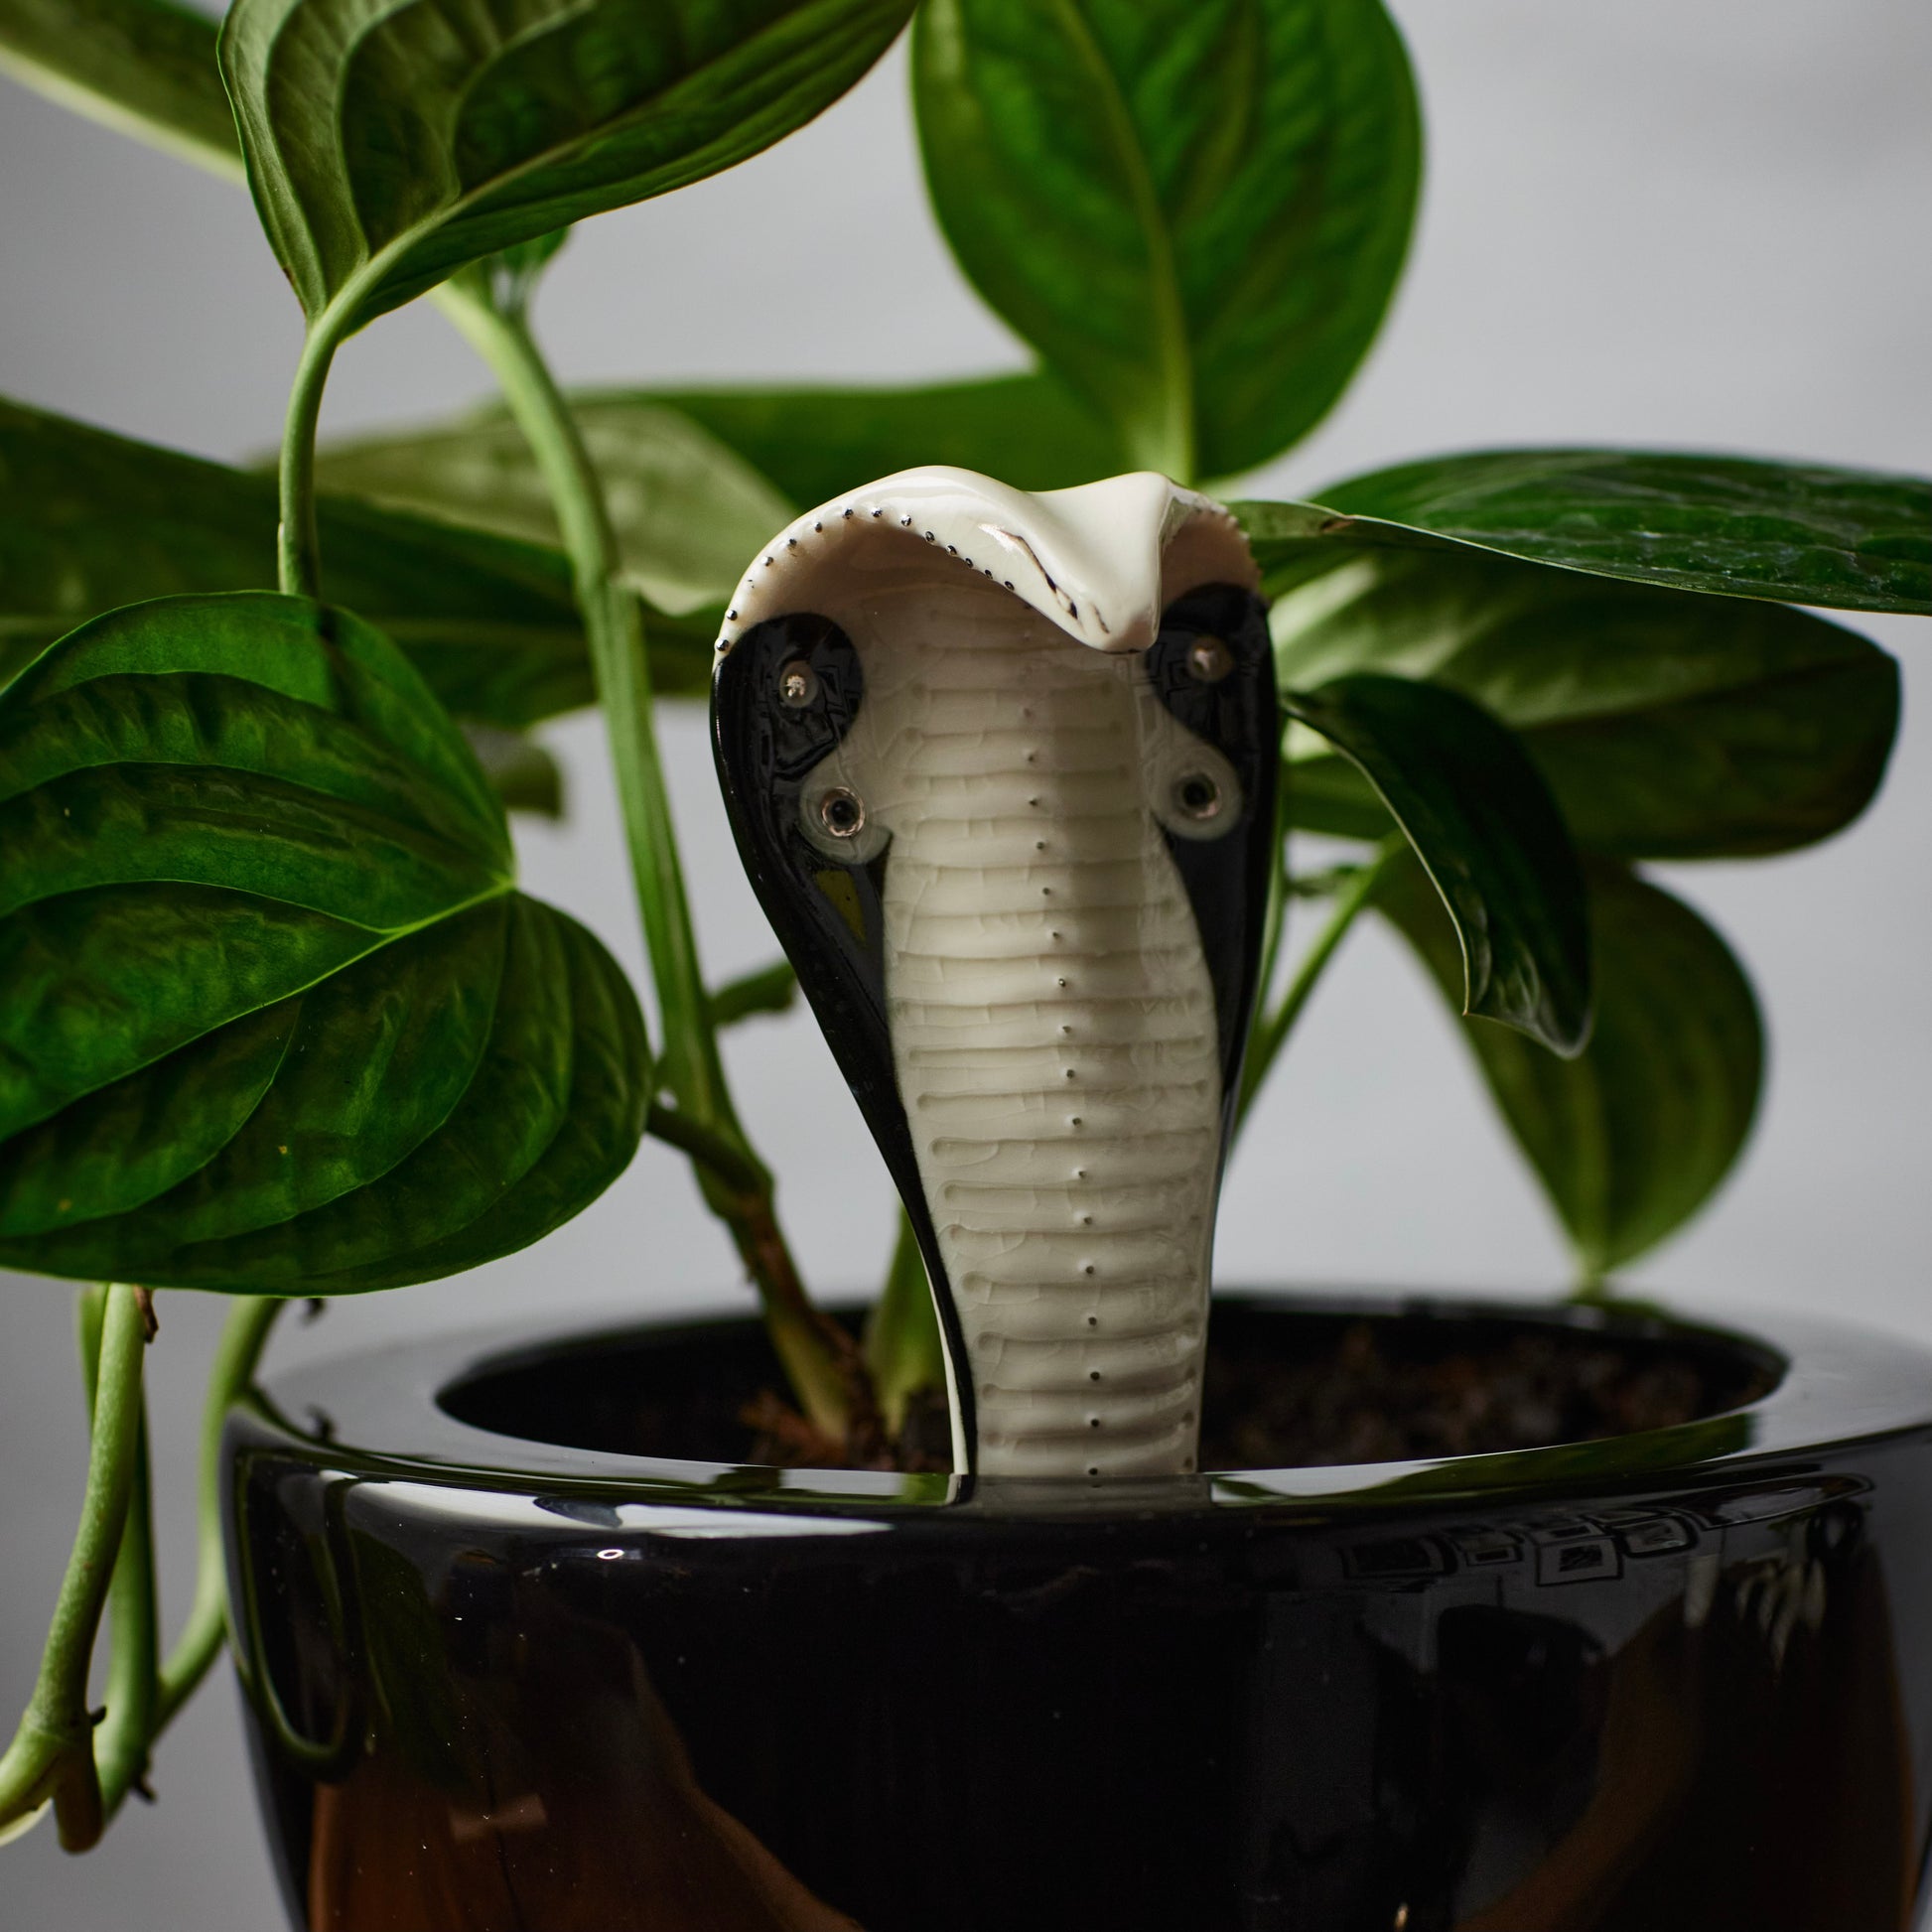 Planter Cobra 1 - Hand crafted Porcelain Plant Ornament. Snake with Detail & Brass Rod for planting.